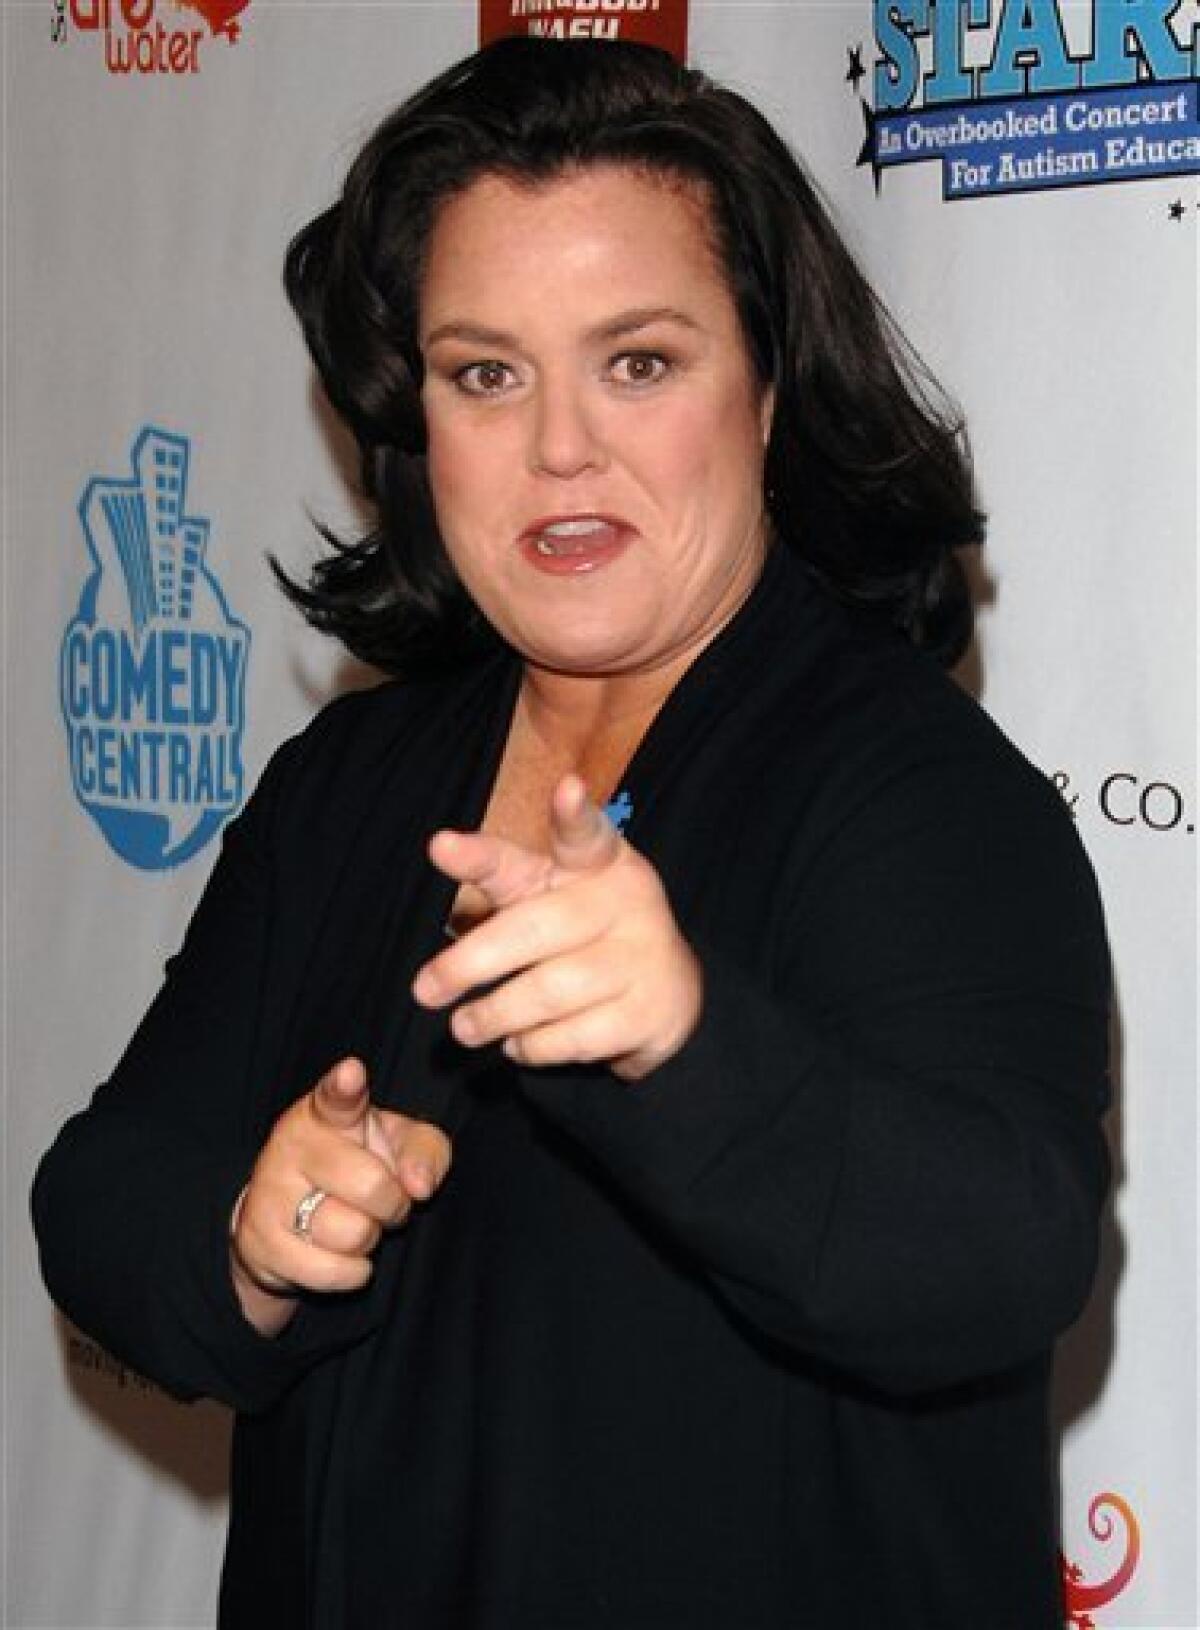 In this April 13, 2008 file photo, comedian Rosie O'Donnell arrives at Comedy Central's "Night of Too Many Stars" special, benefiting autism education at The Beacon Theatre in New York. (AP Photo/Peter Kramer, file)